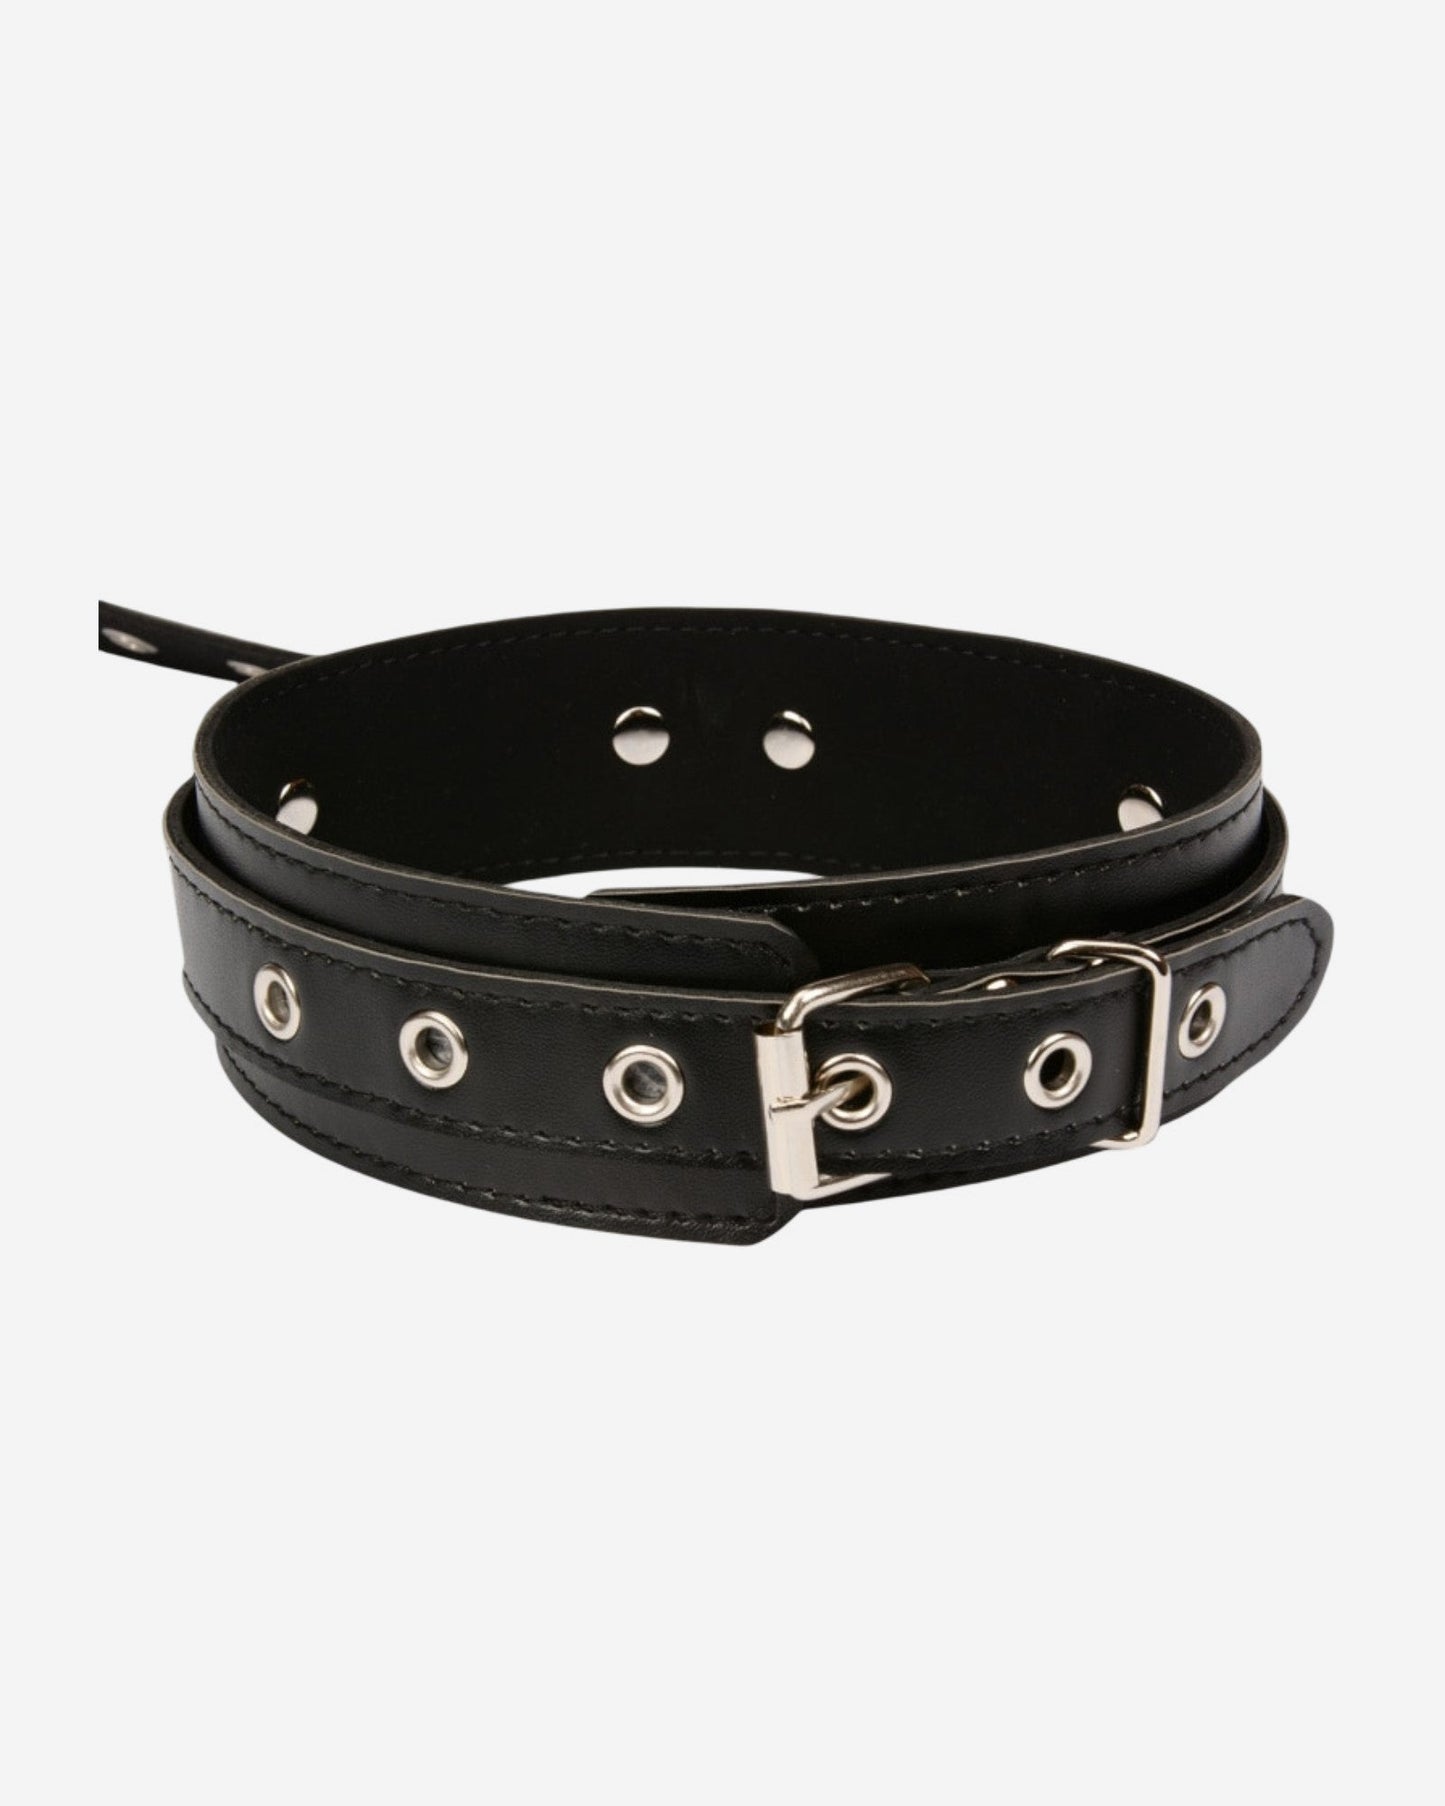 Collars & Leashes BDSM Sexy Handcuffs & Collar